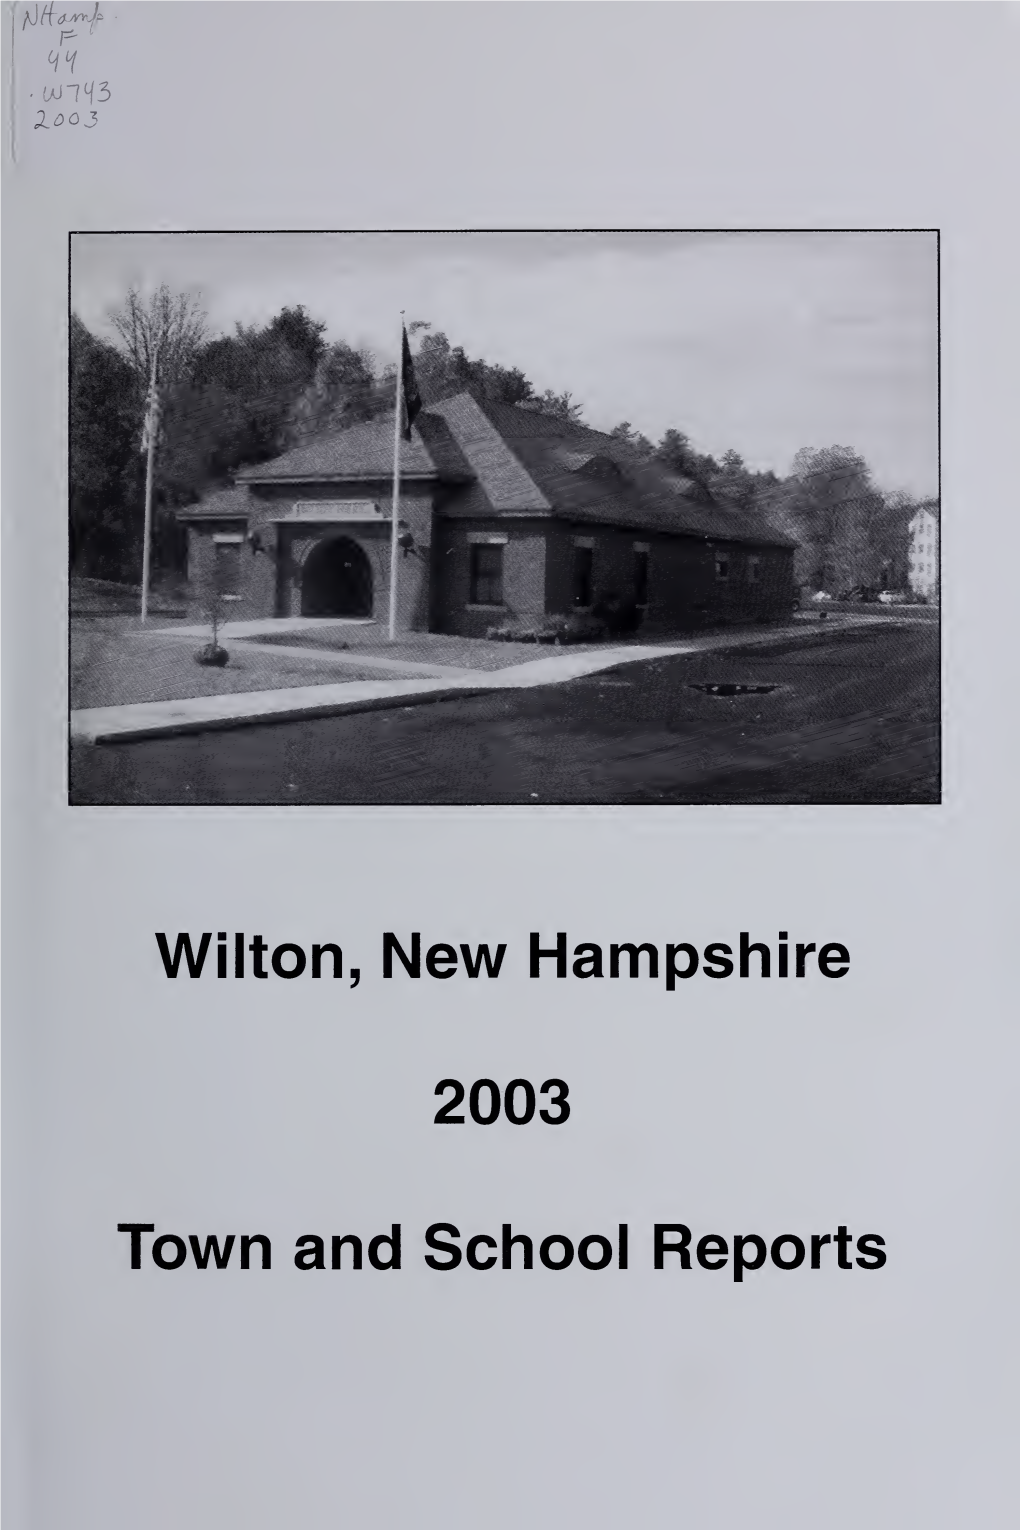 Annual Report of the Town of Wilton, New Hampshire